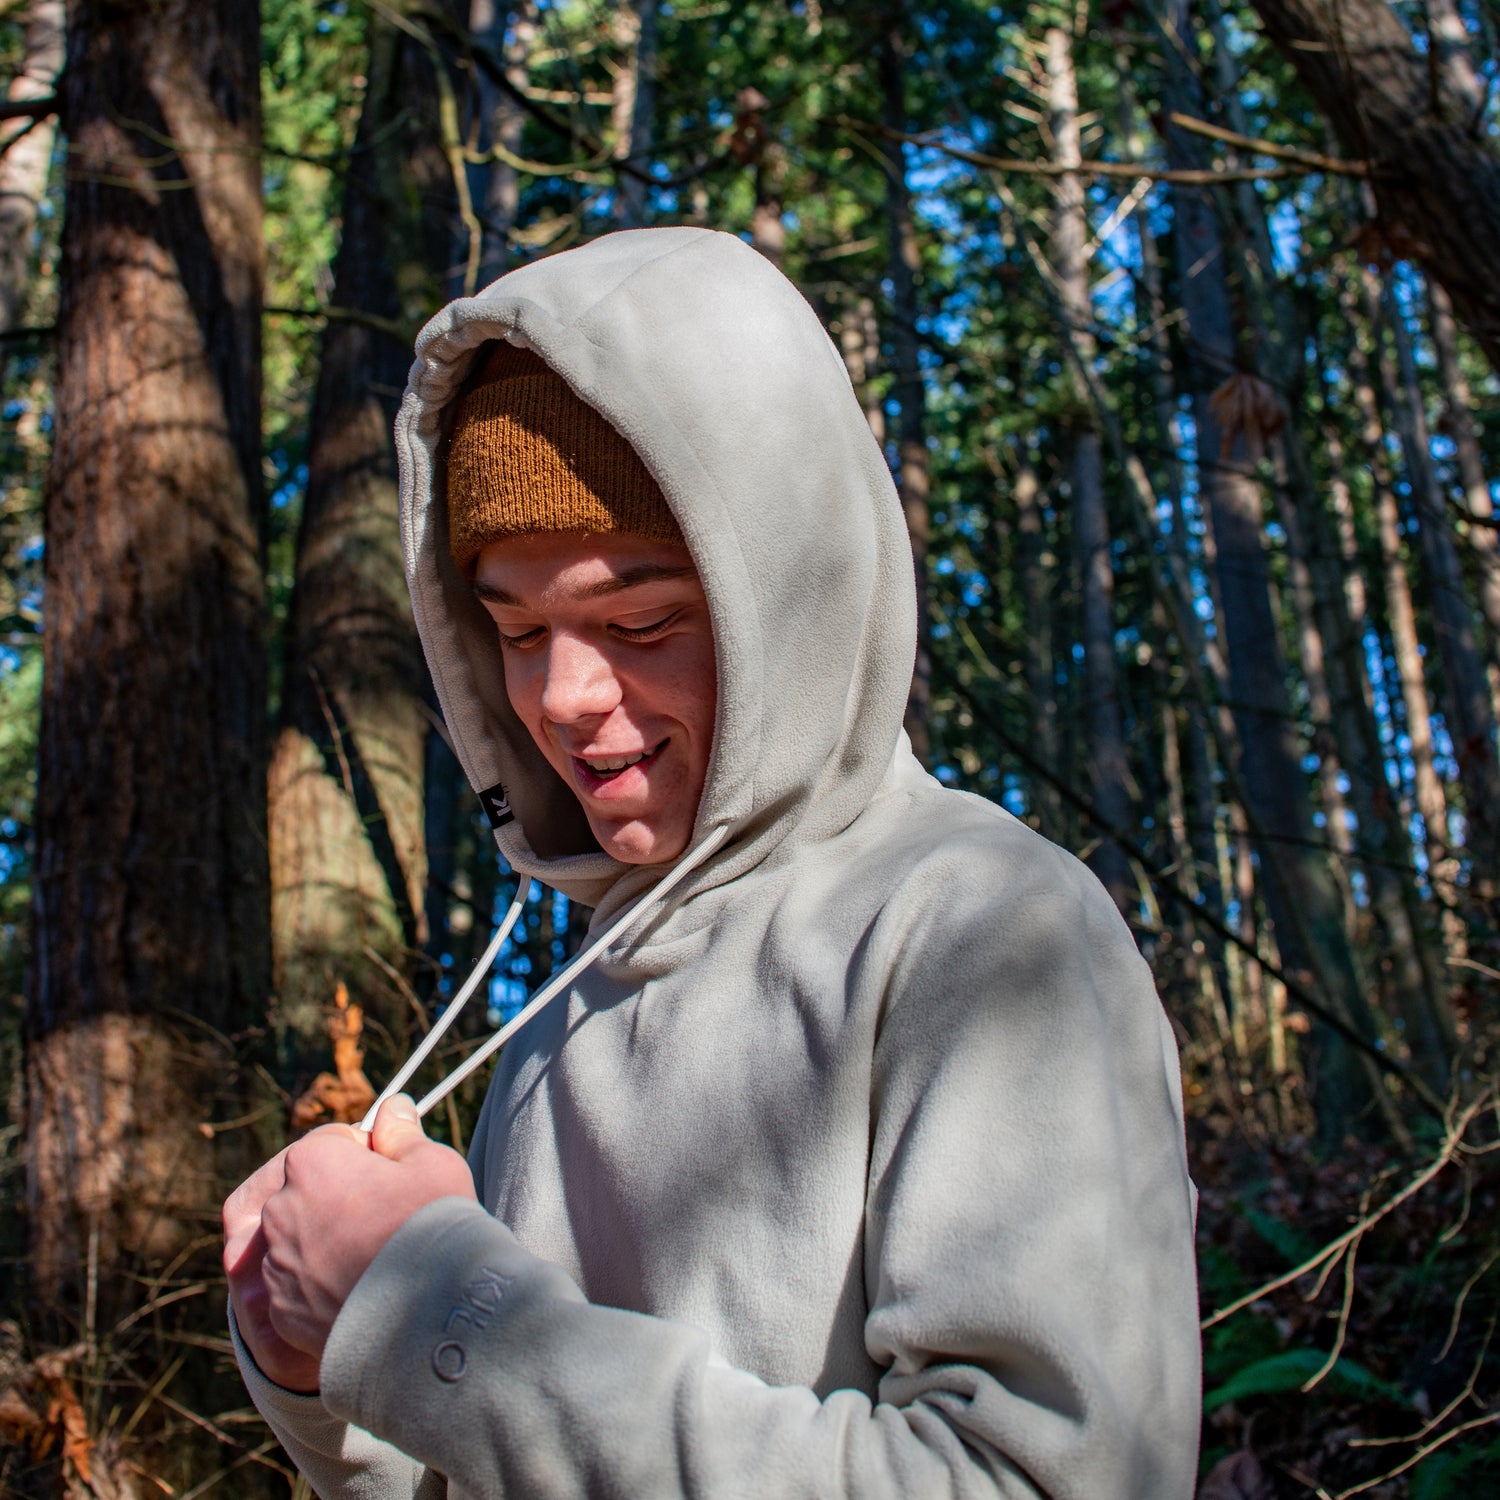 Grey Sustainable polar fleece hoodie made from recycled fabric. Unisex Athletic fit, moisture wicking, lightweight, cozy and comfortable. Perfect for the outdoors or working from home. Grey hoodie in the forest in the Pacific North West.